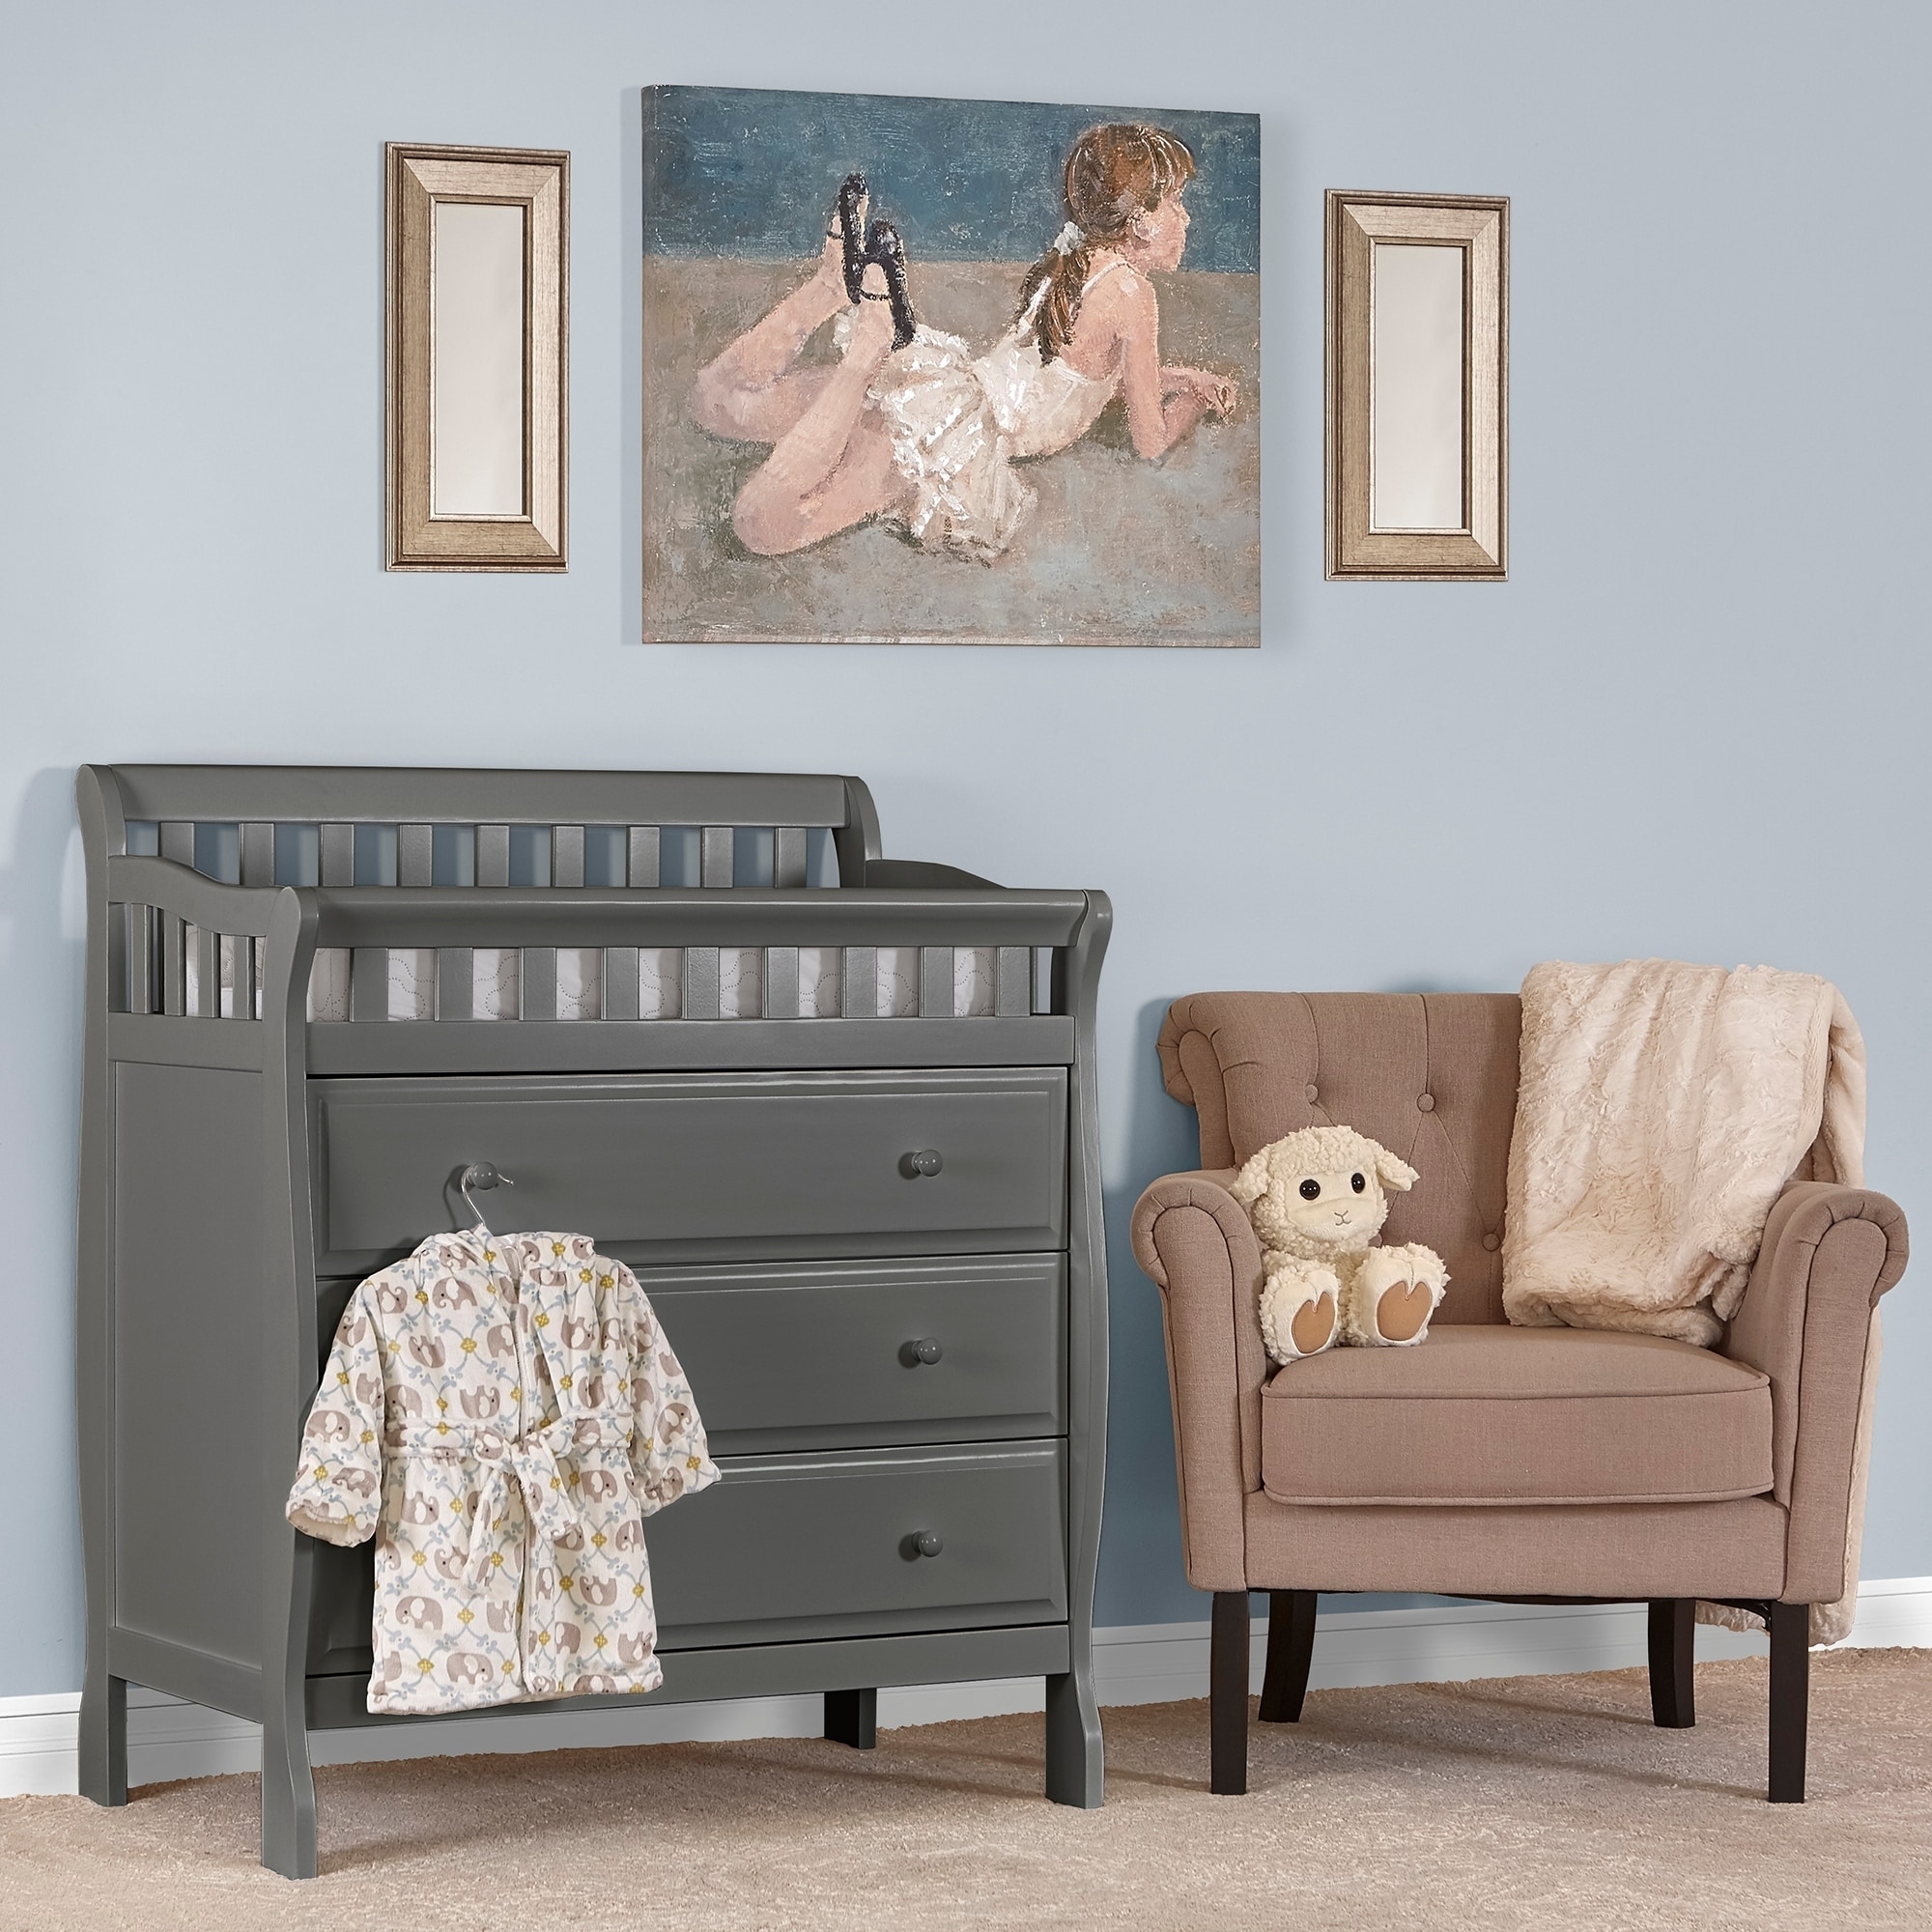 Shop Dream On Me Marcus Changing Table And Dresser Overstock